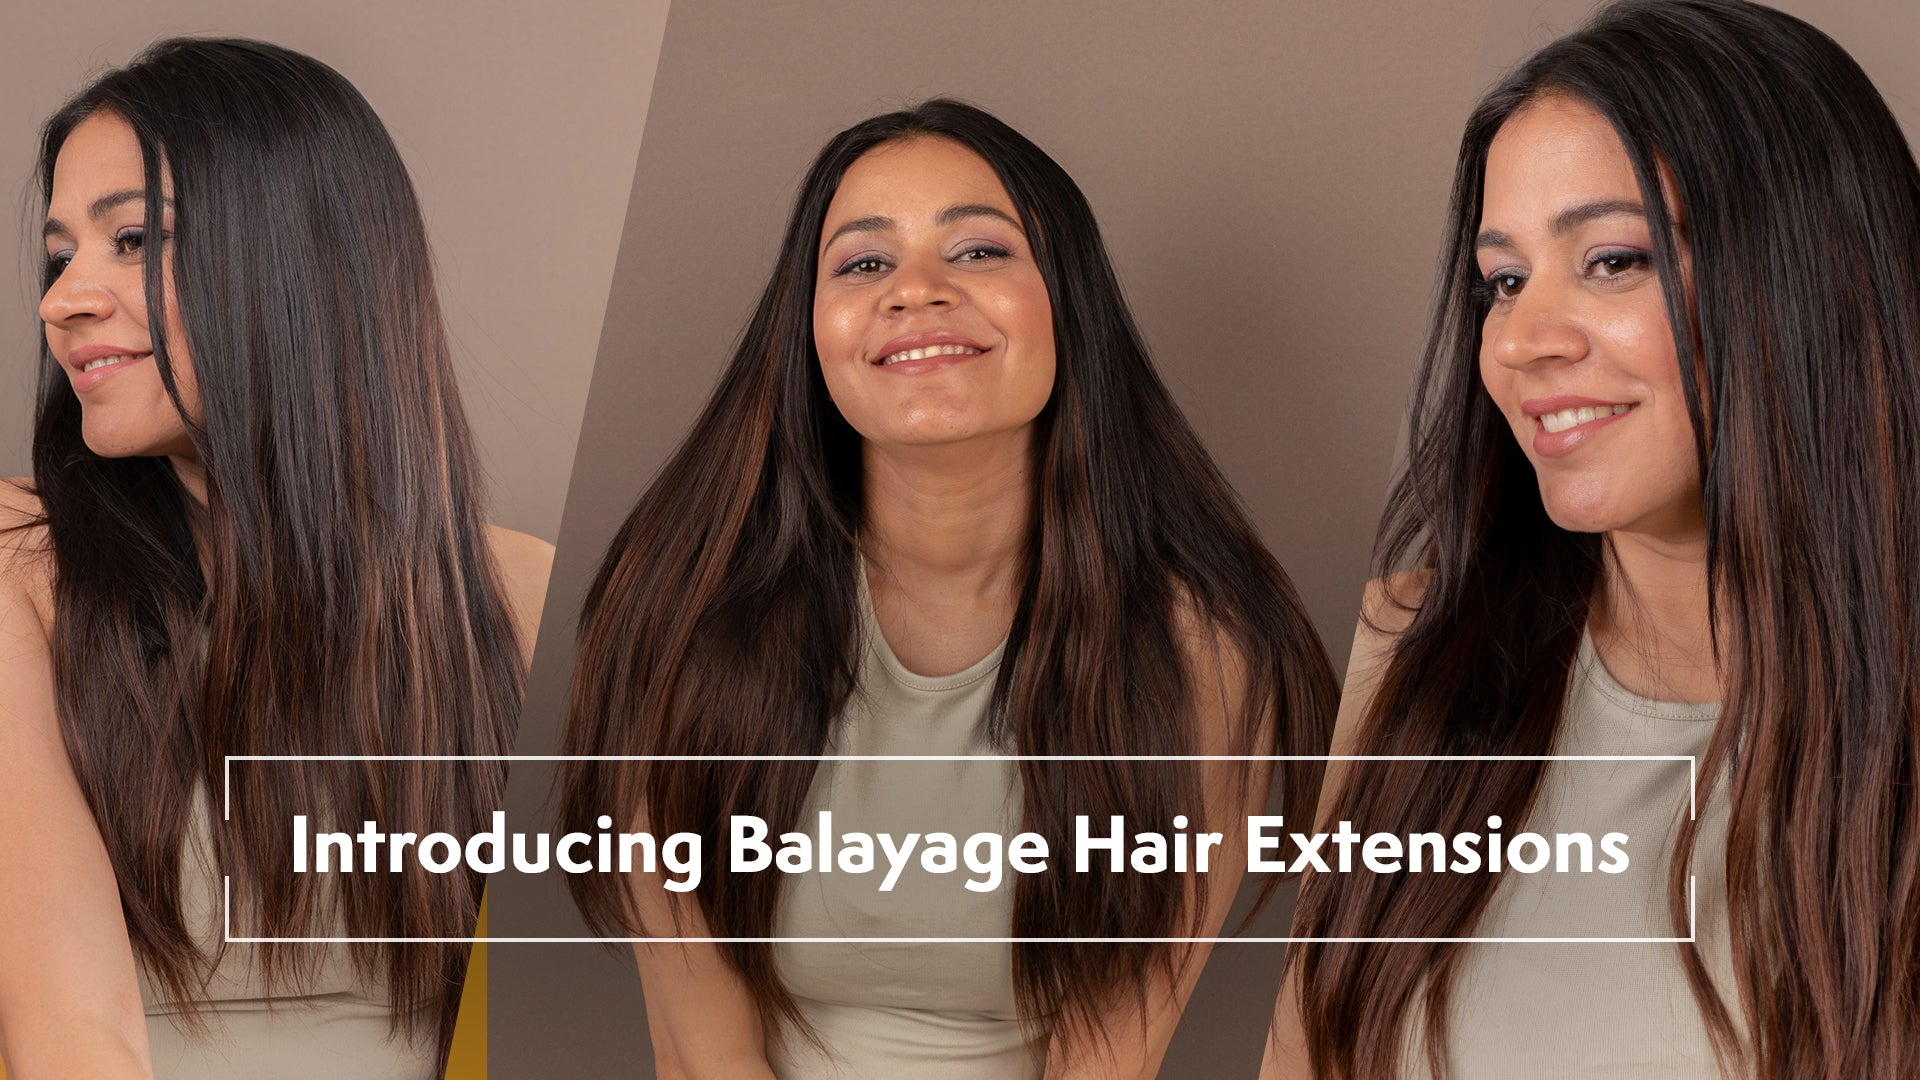 Balayage Hair Extensions For Indian Women & Why You Need Them?